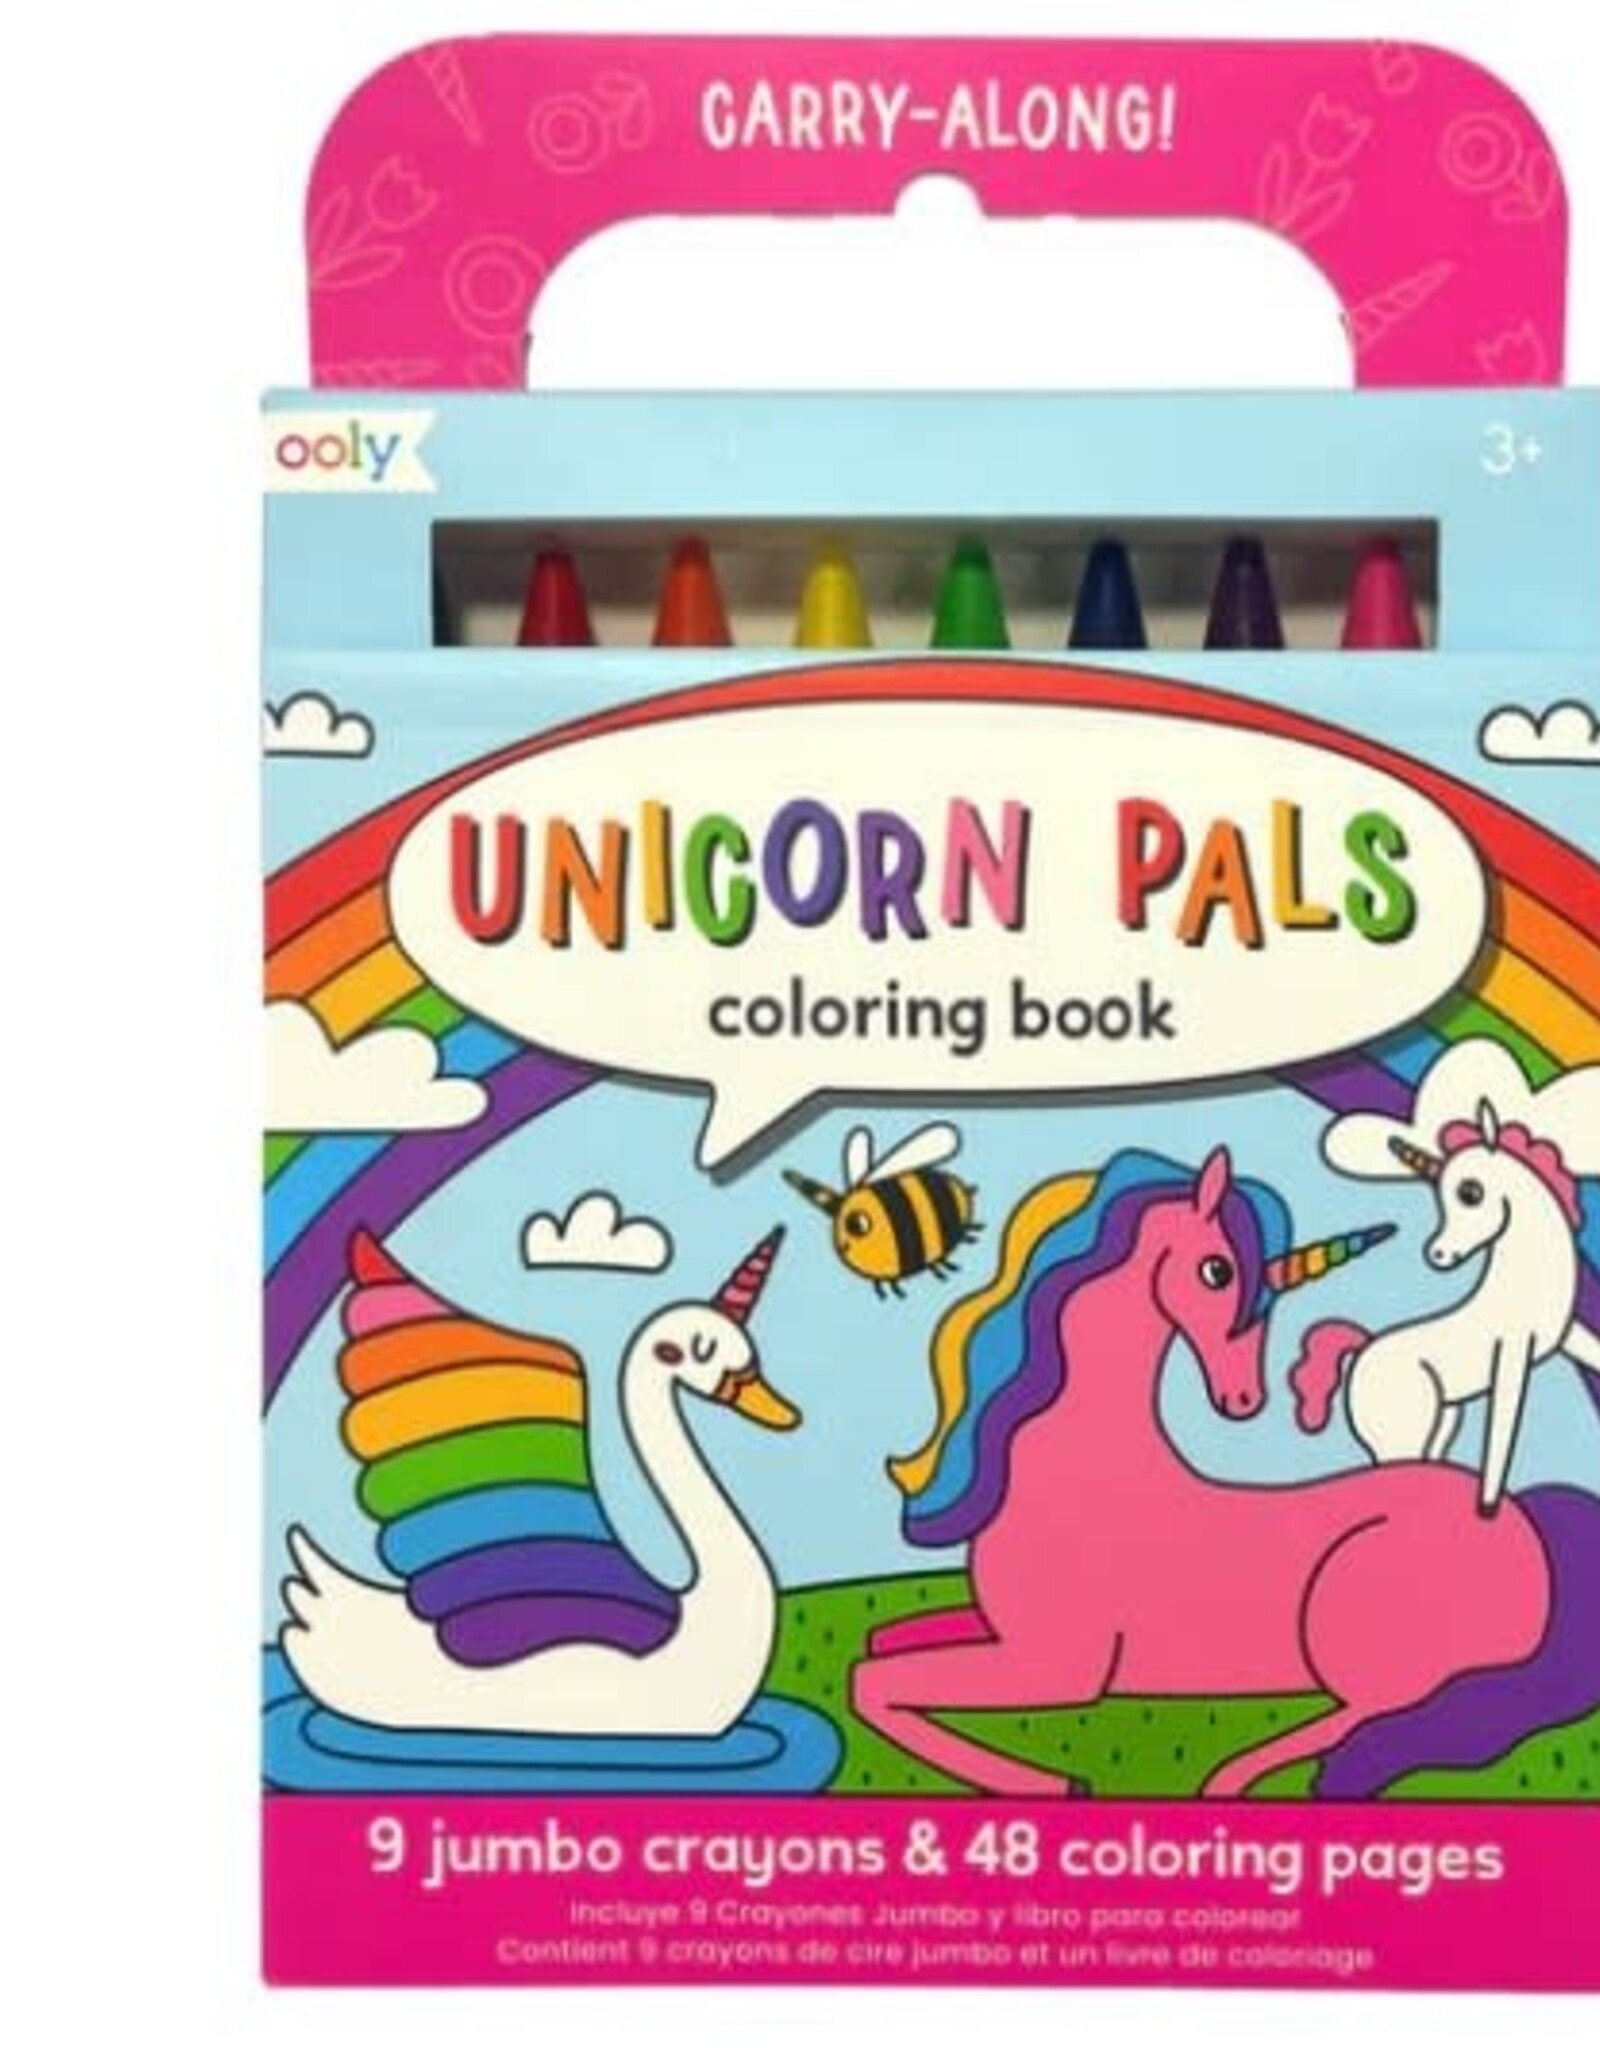 OOLY CARRY ALONG CRAYONS & COLOURING BOOK KIT - UNICORN PALS